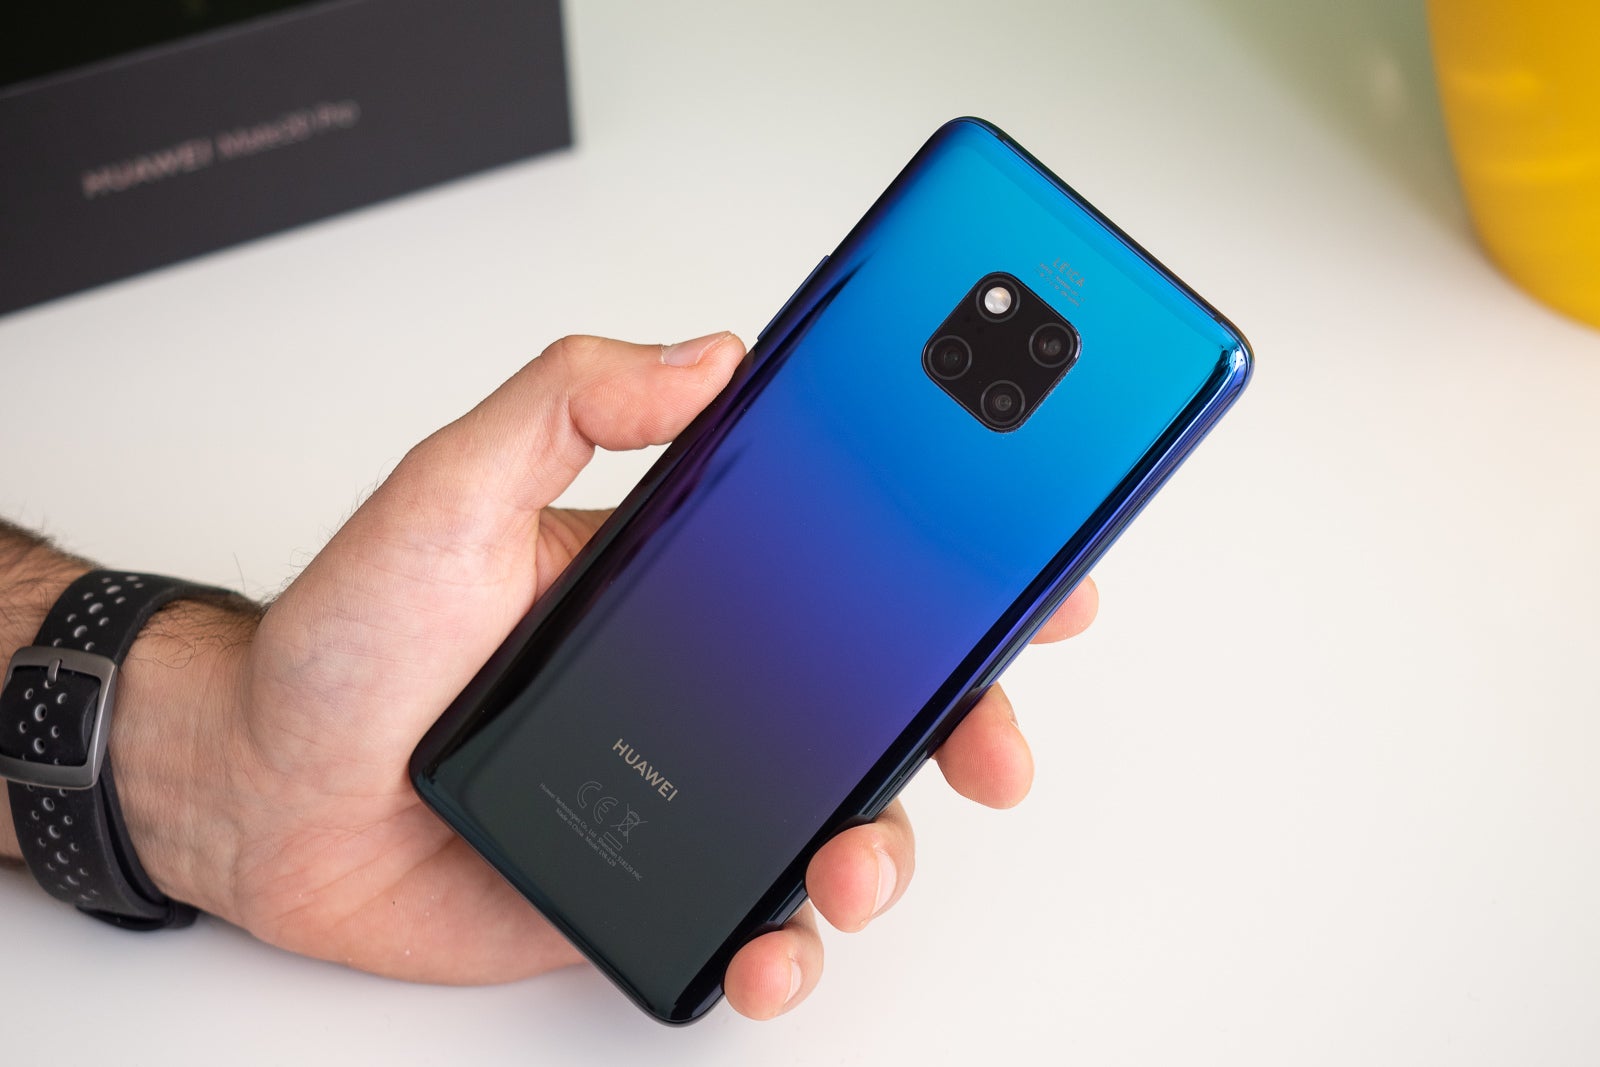 5 things to love and 5 things to hate about the Huawei Mate 20 Pro